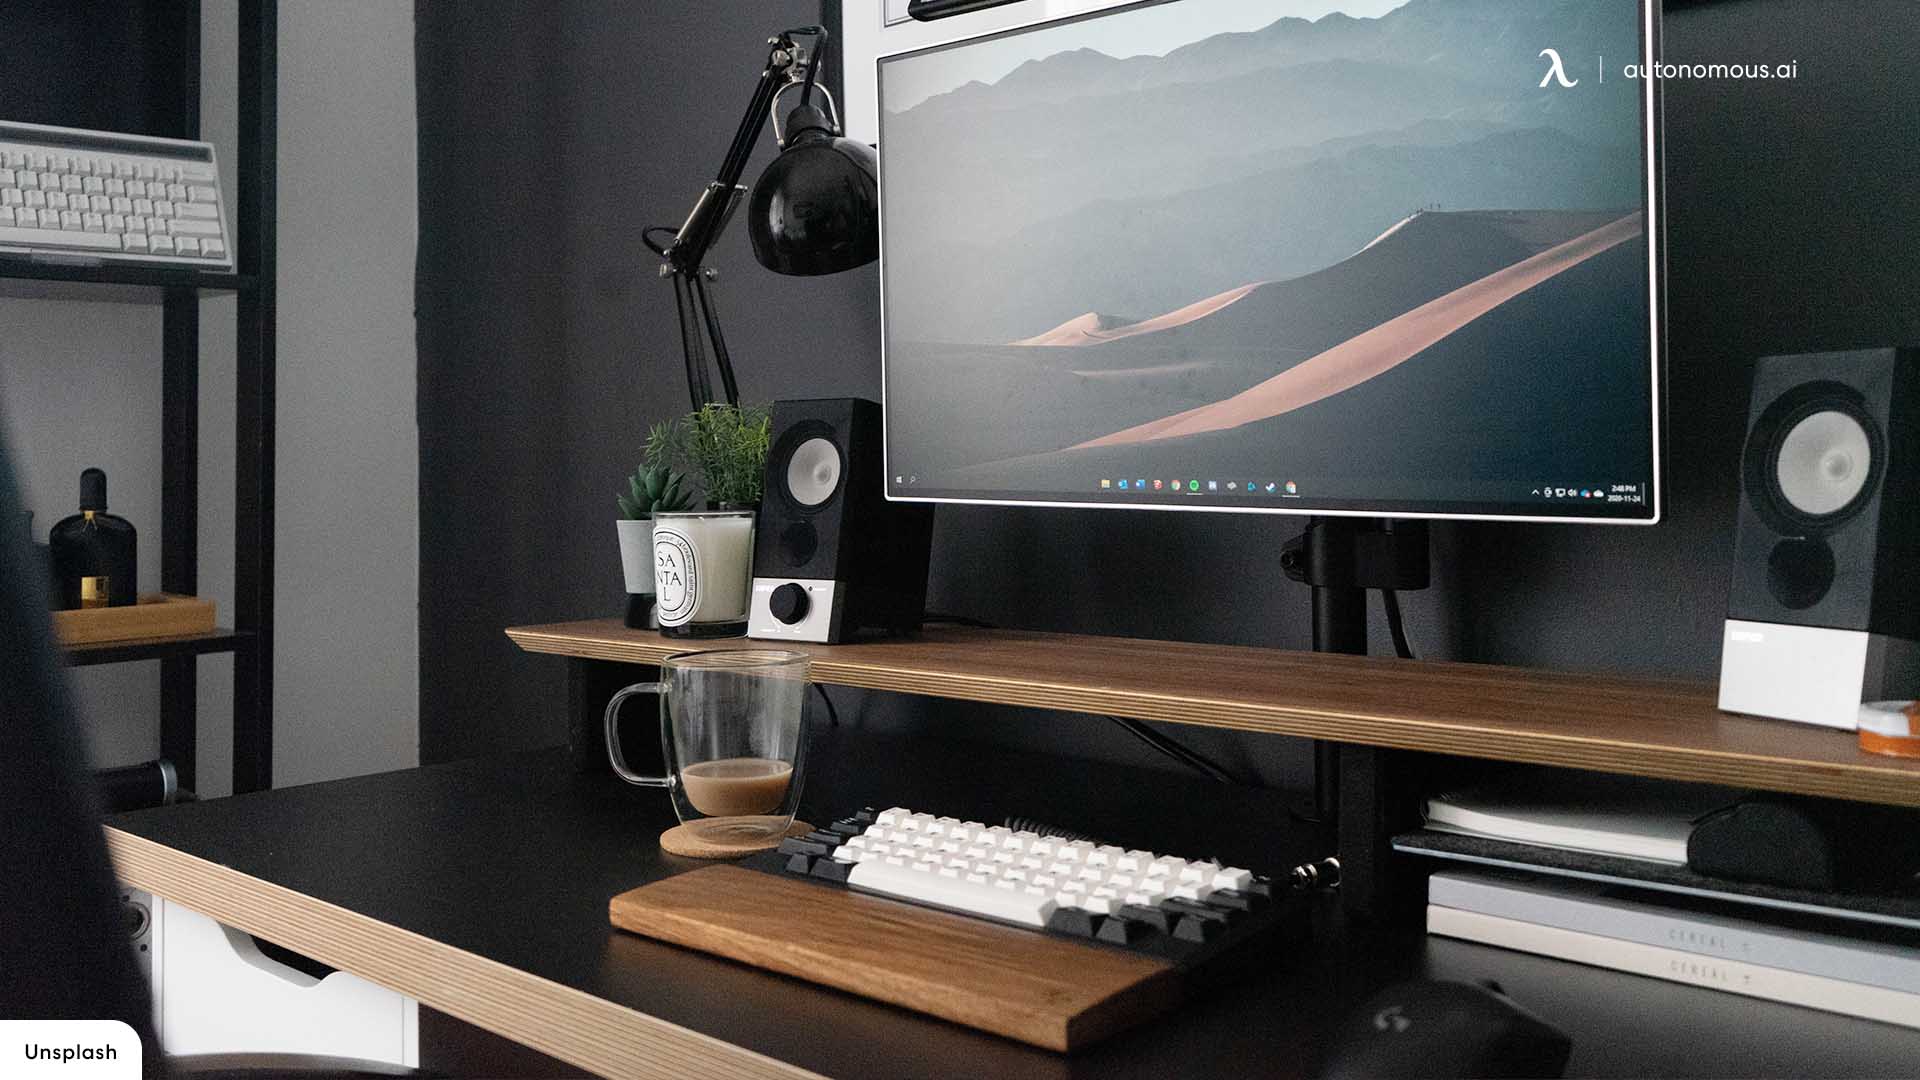 15 Unique and Useful Cool Desk Accessories You Don’t Want to Live Without